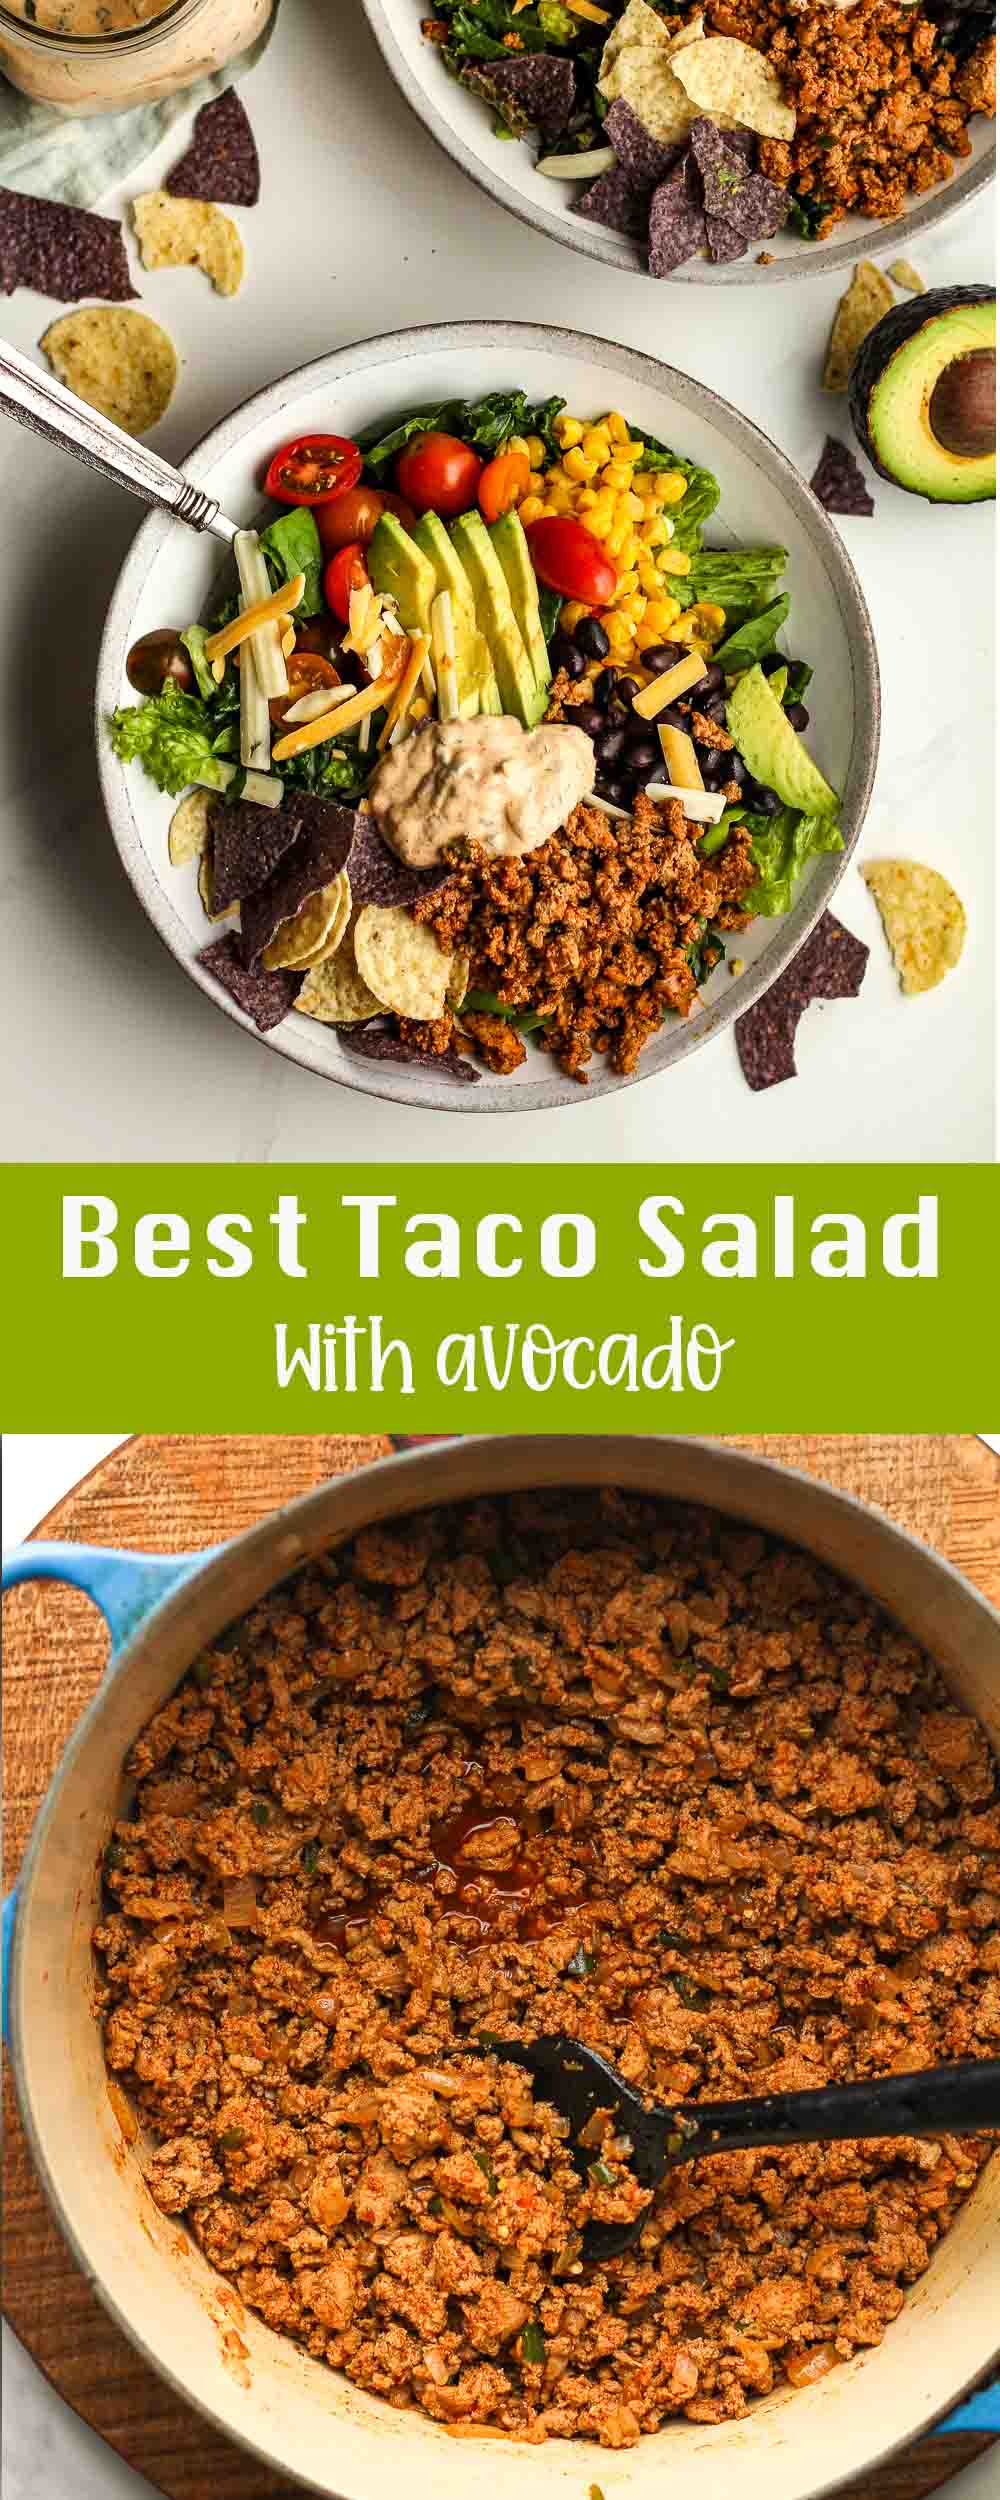 Two photos of the Best Taco Salad with Avocado.